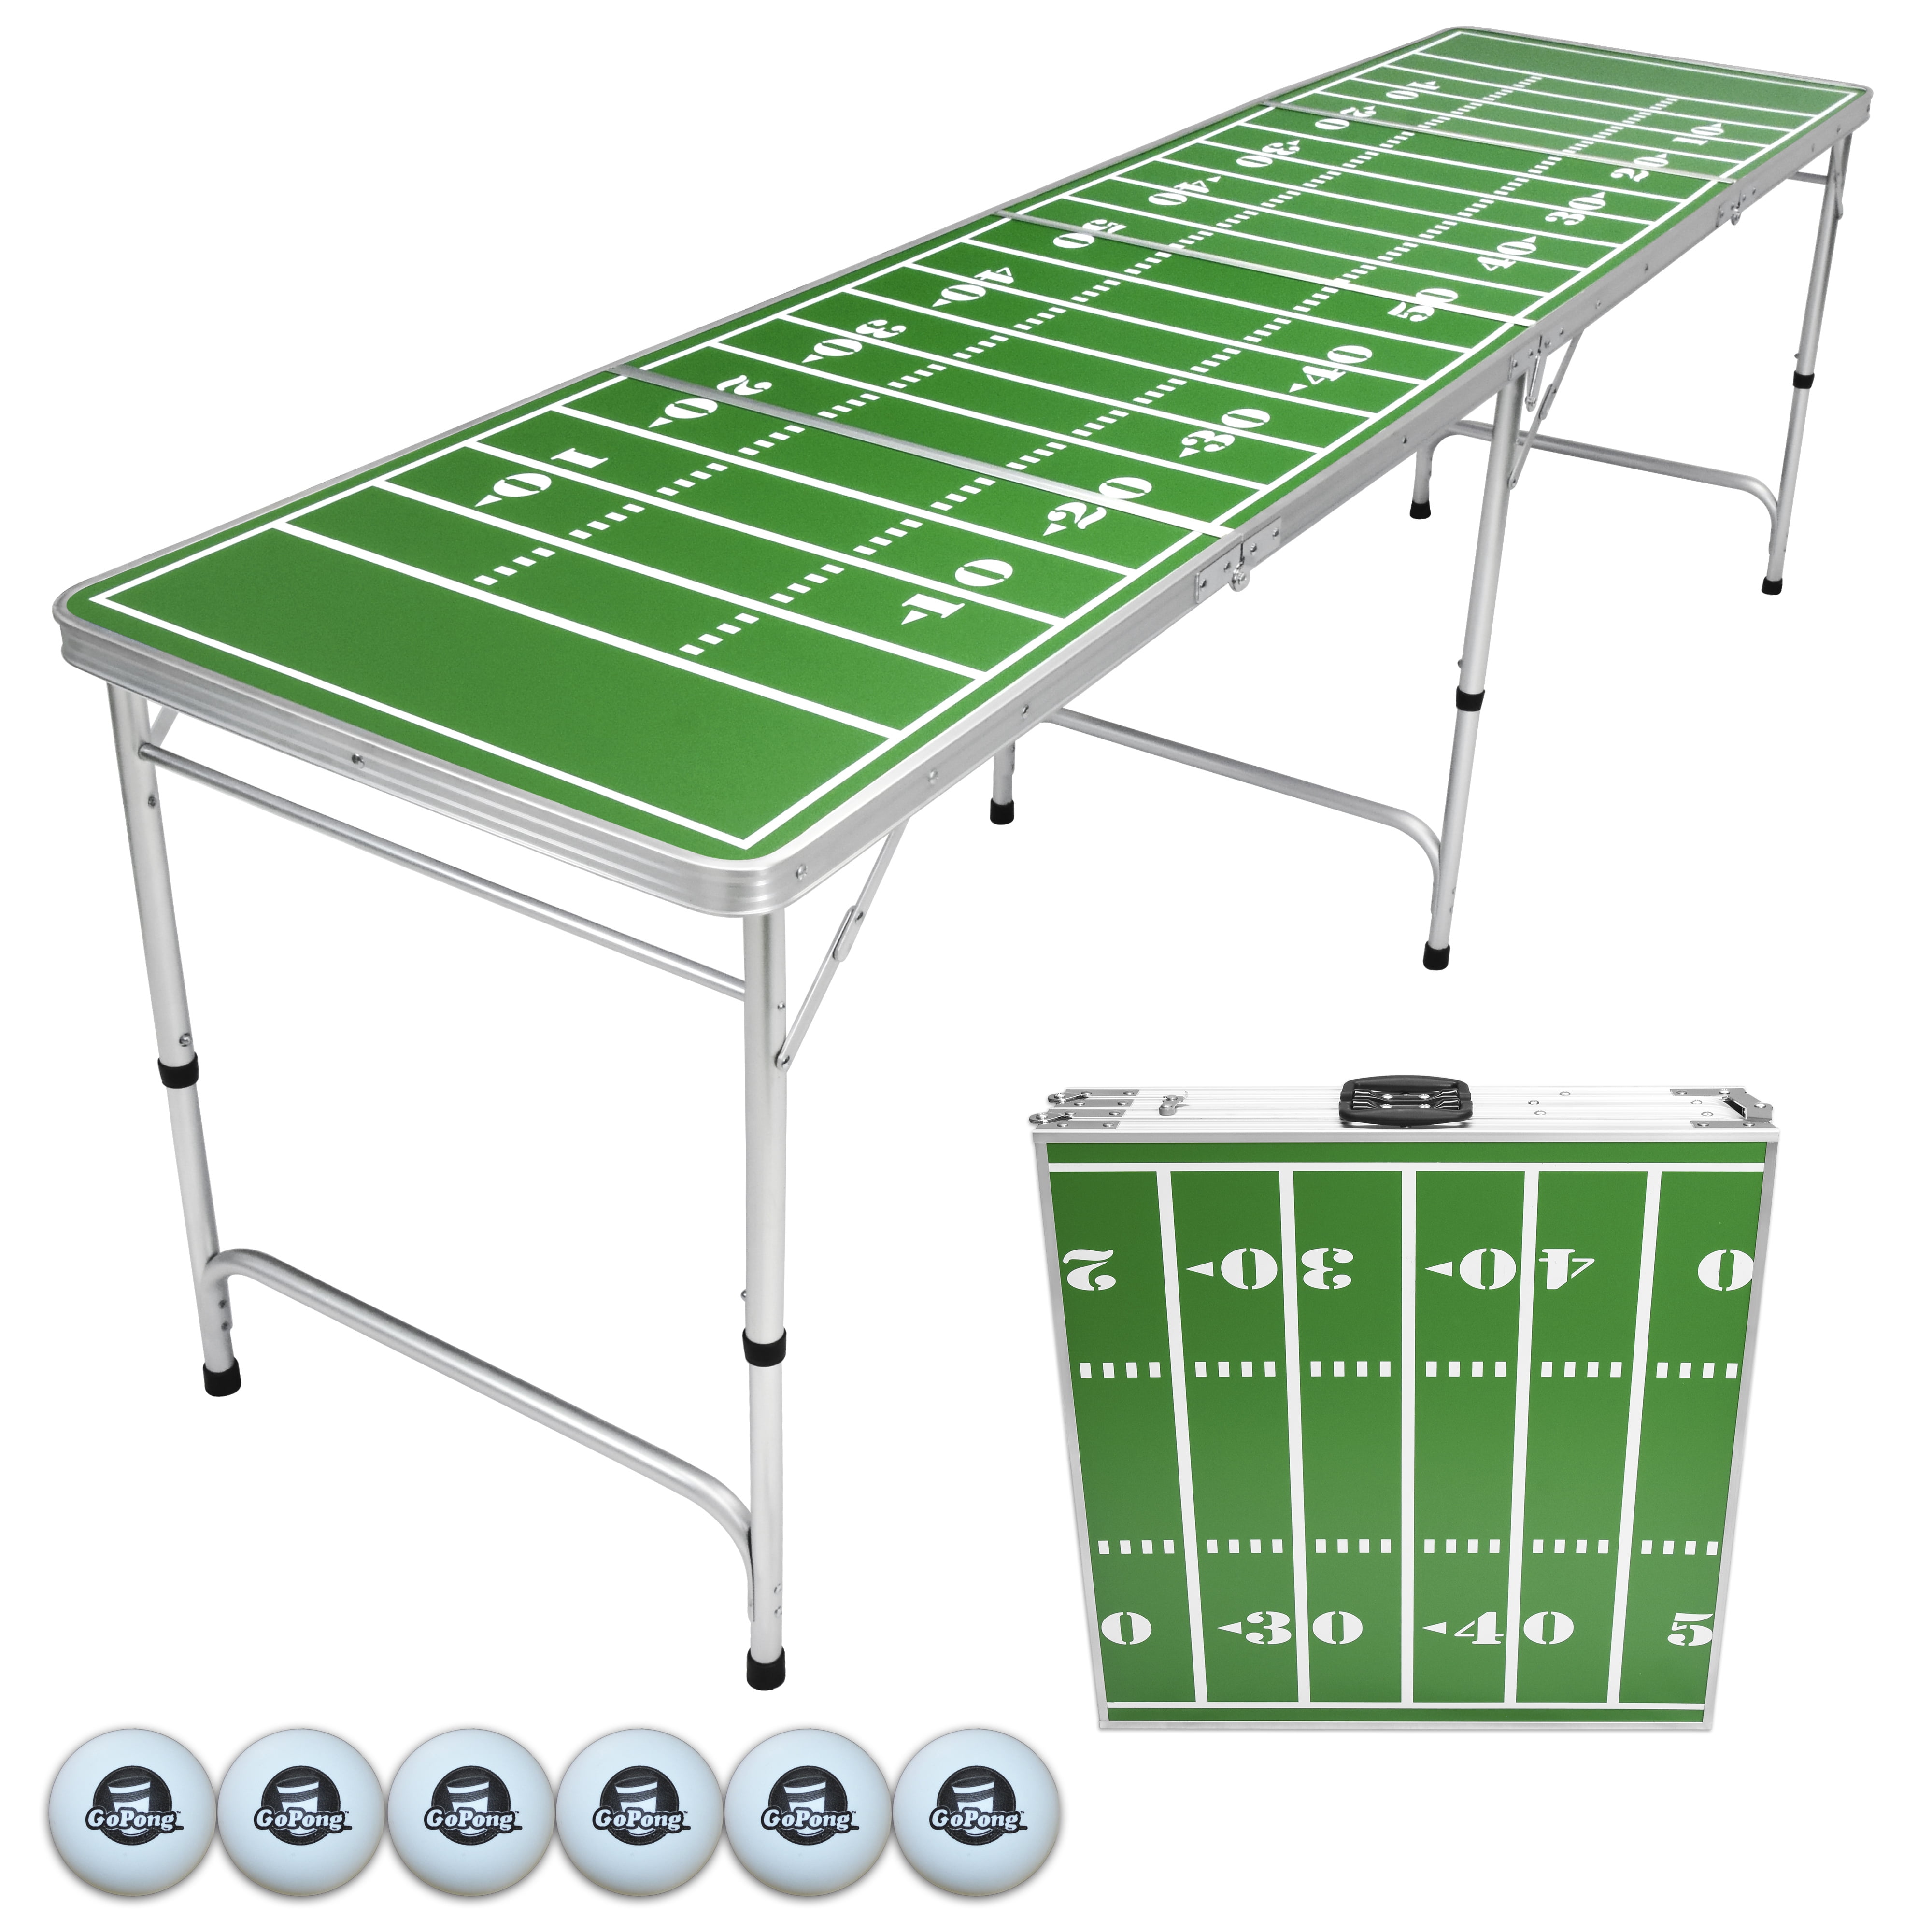 OFFICIAL SIZE 8 FOOT FOLDING BEER PONG TABLE BBQ PARTY DRINKING GAMES 